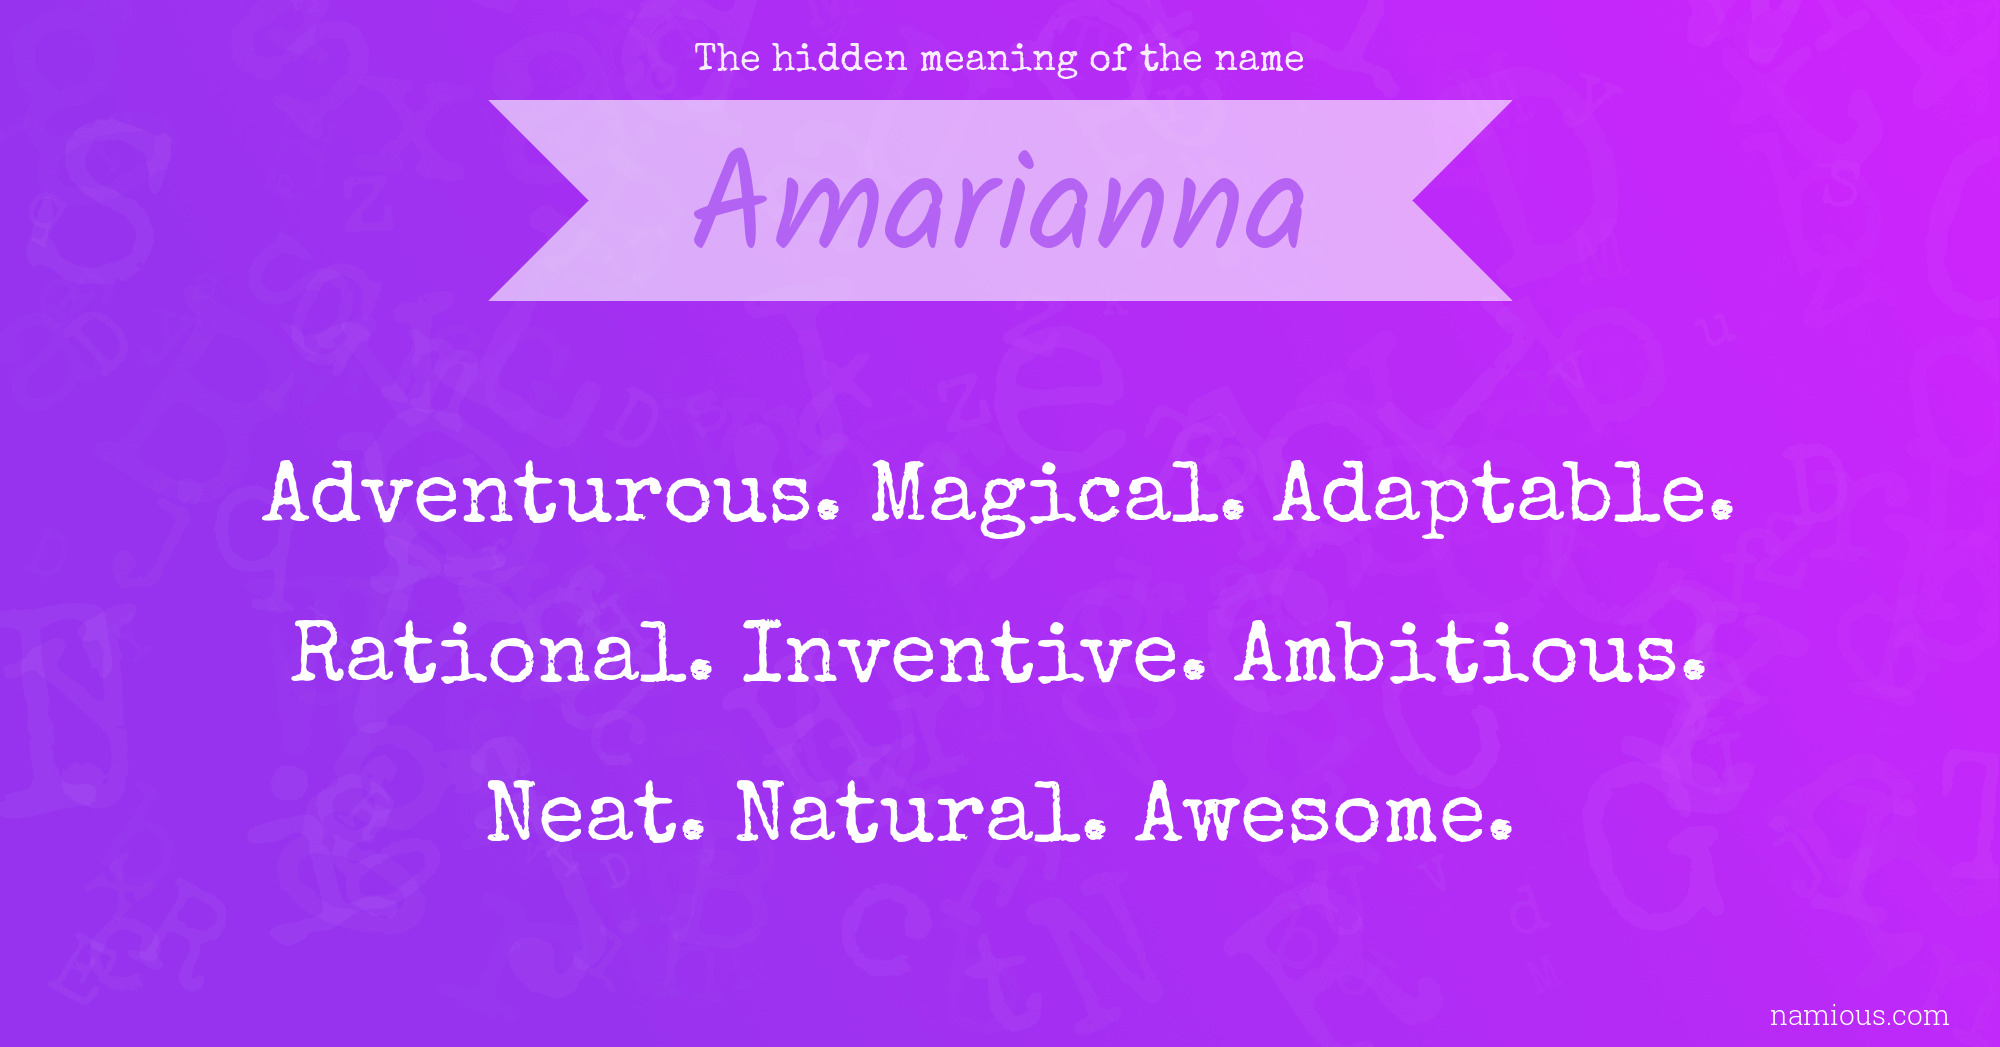 The hidden meaning of the name Amarianna